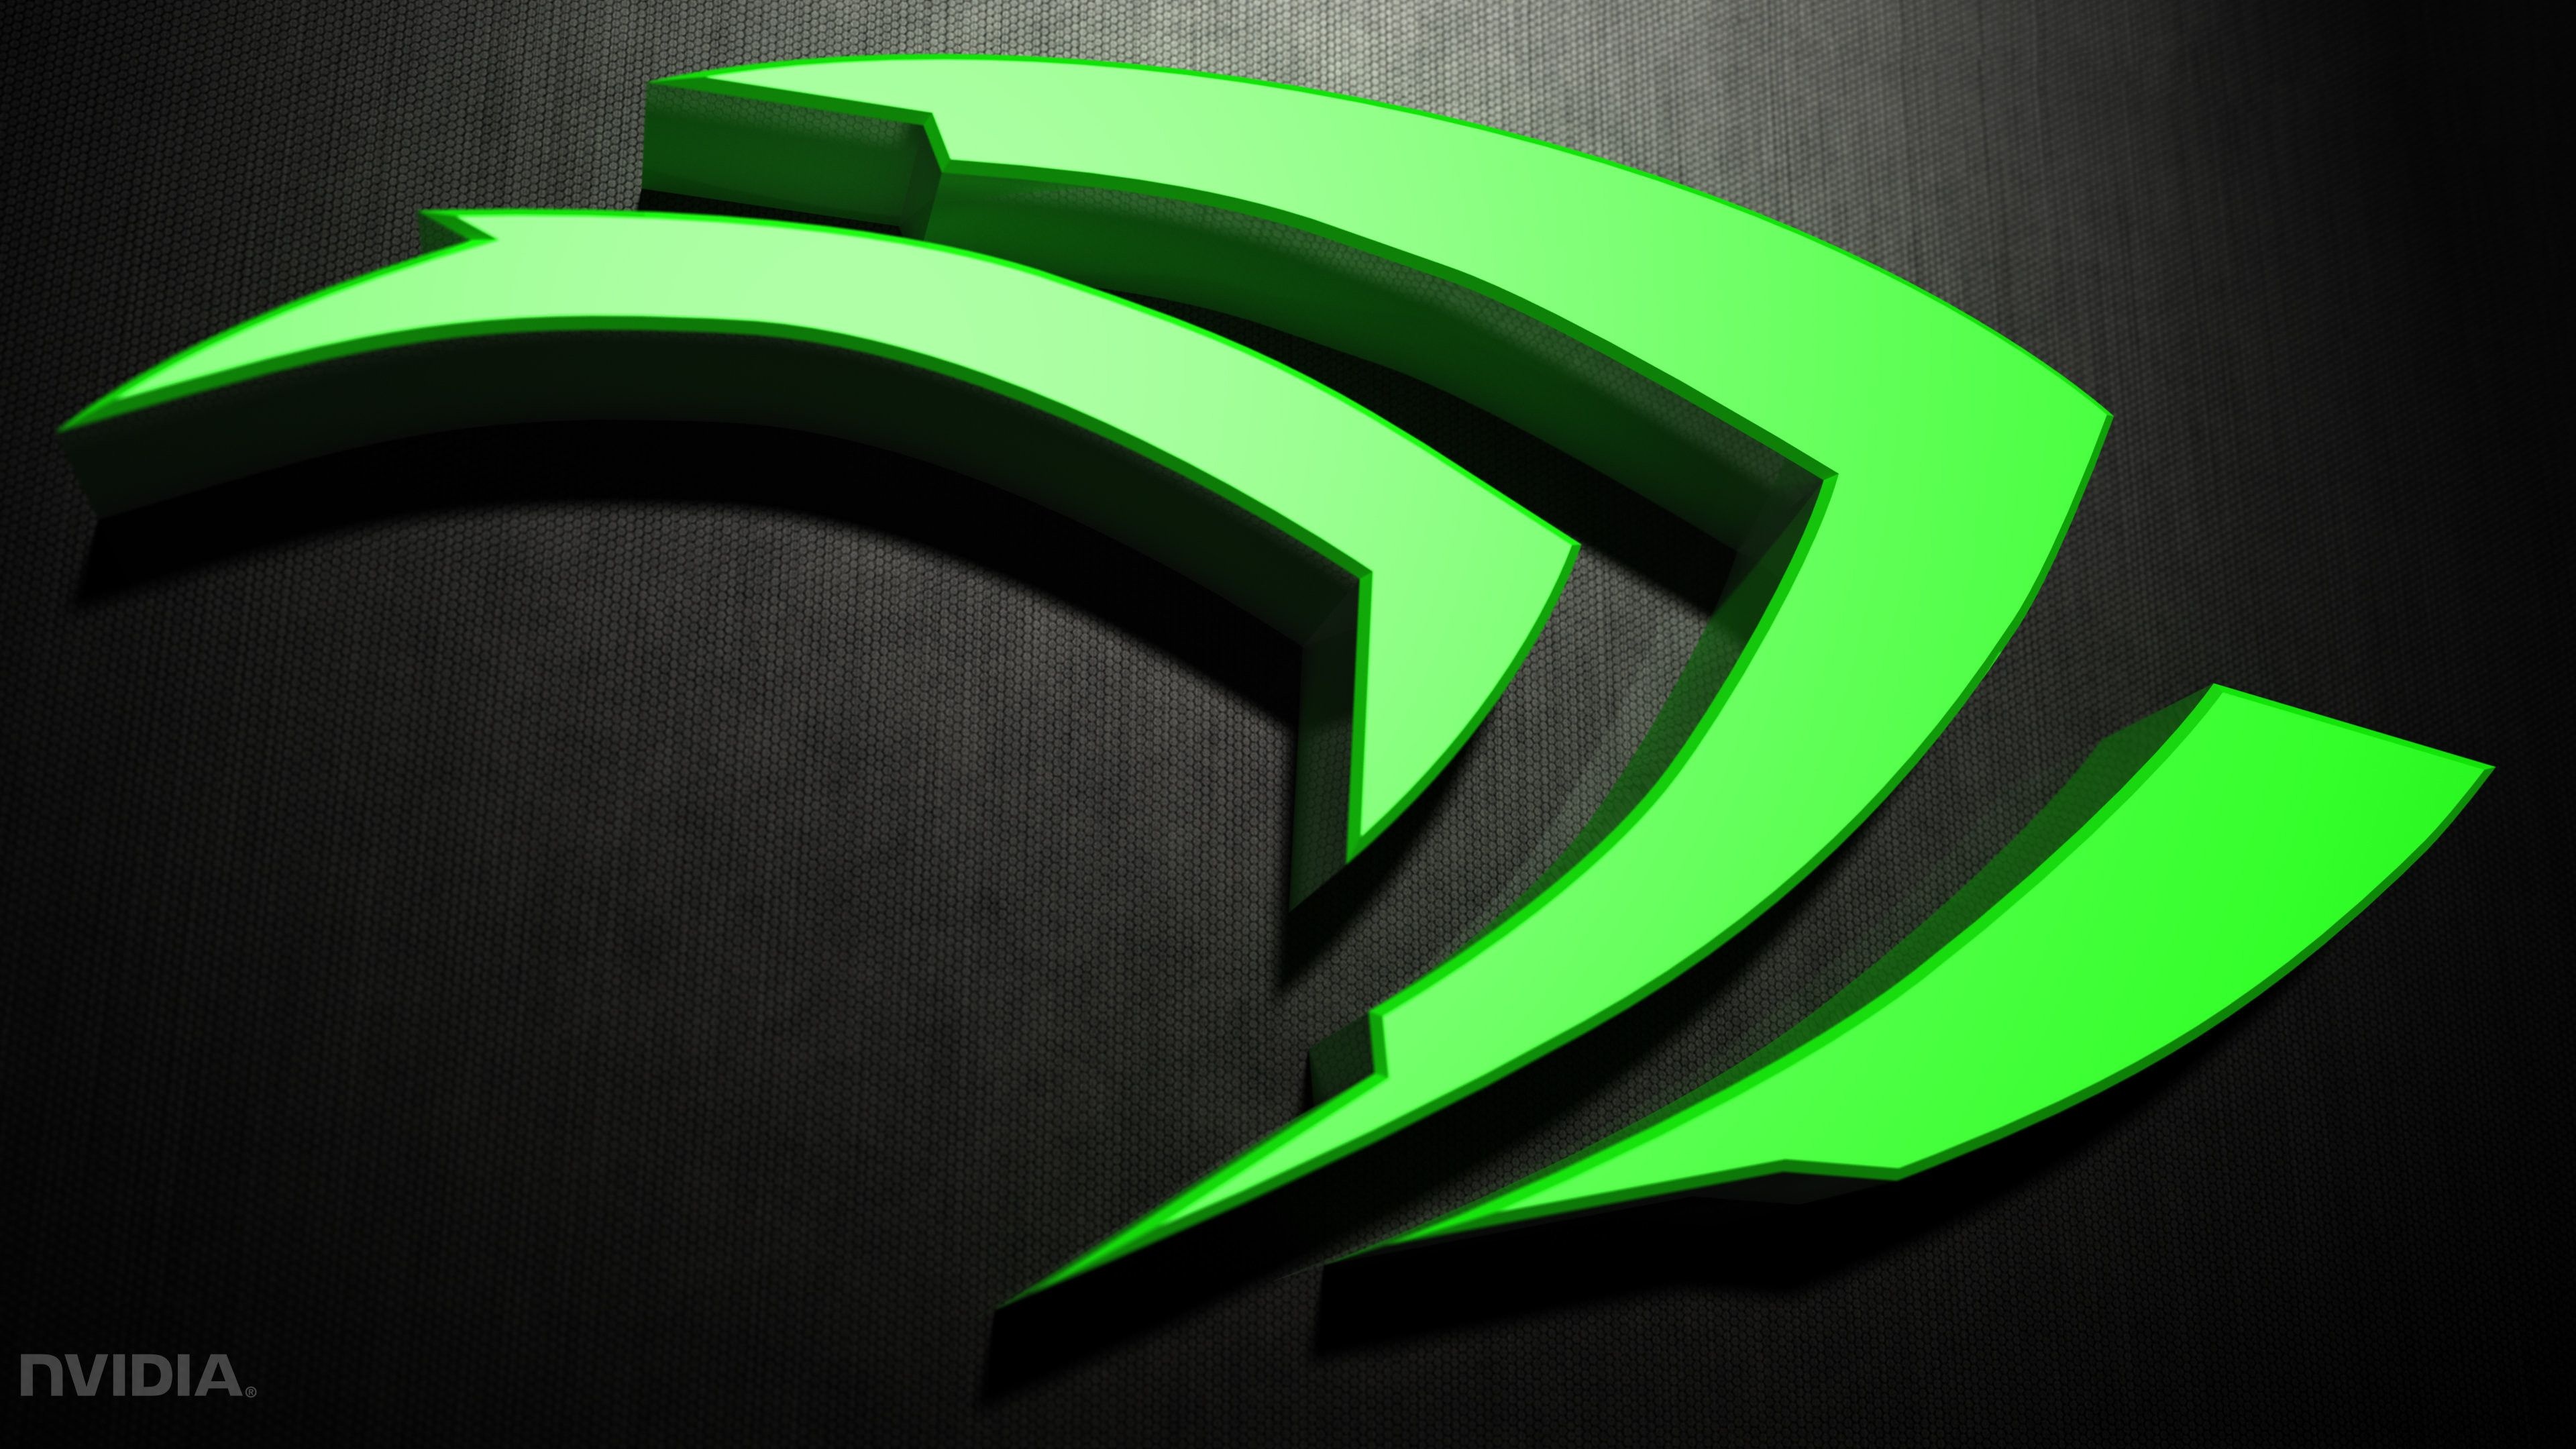 Nvidia: A global leader in artificial intelligence hardware and software, GPUs. 3840x2160 4K Wallpaper.